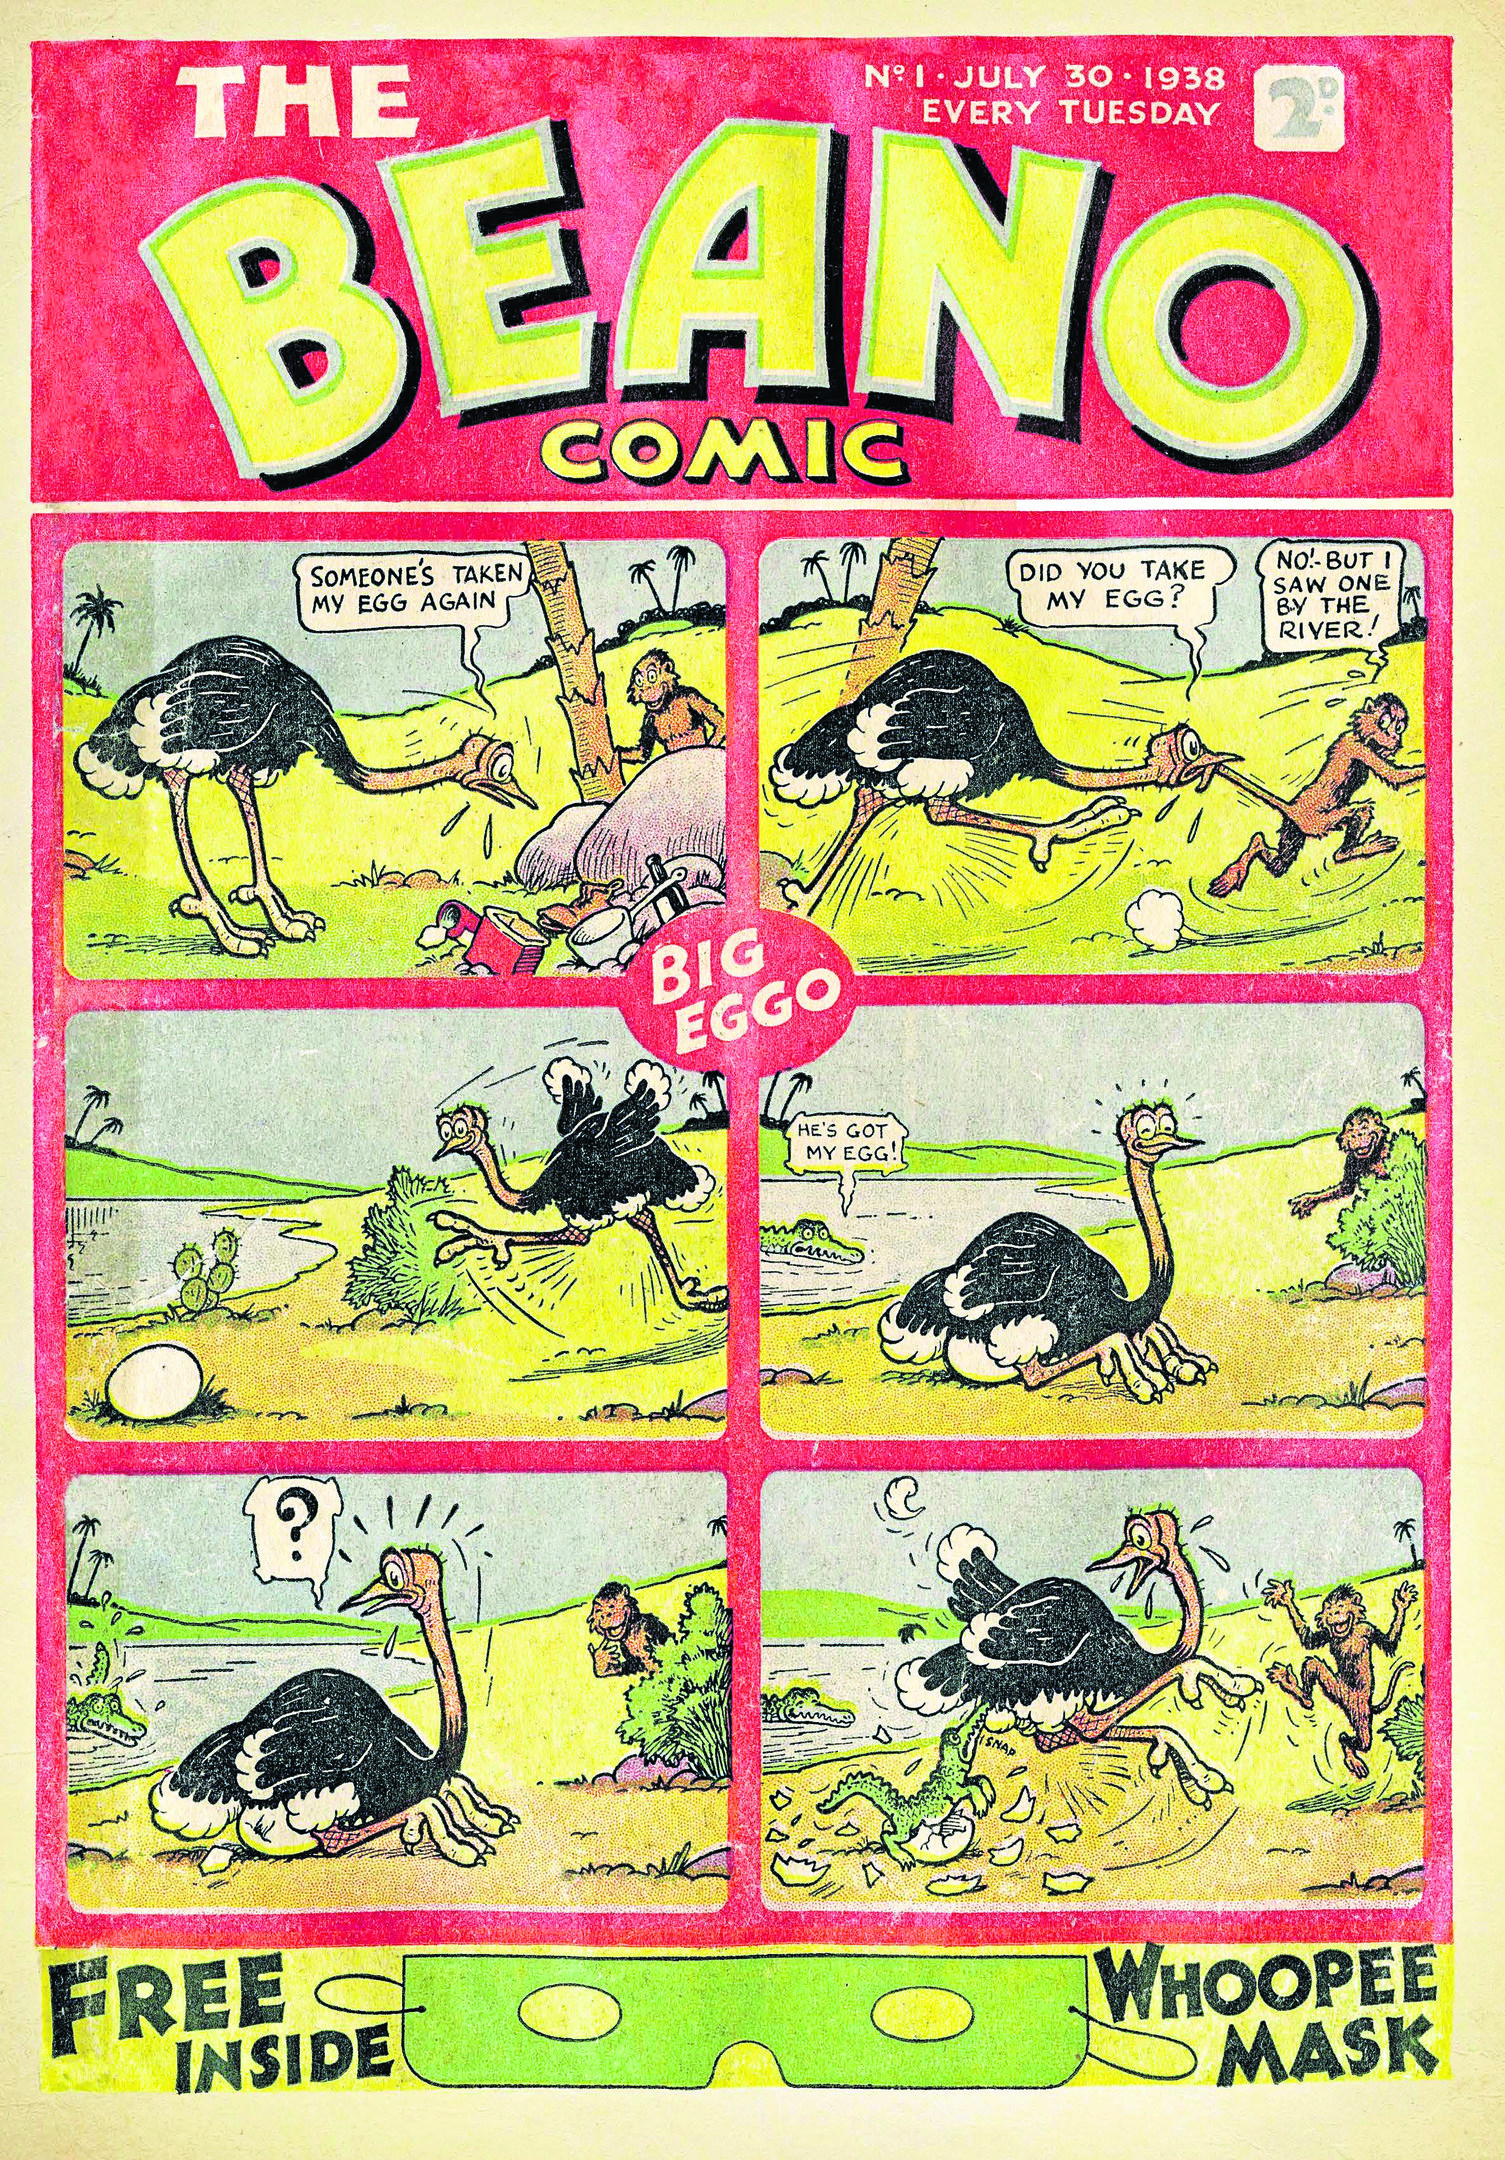 The first Beano cover.